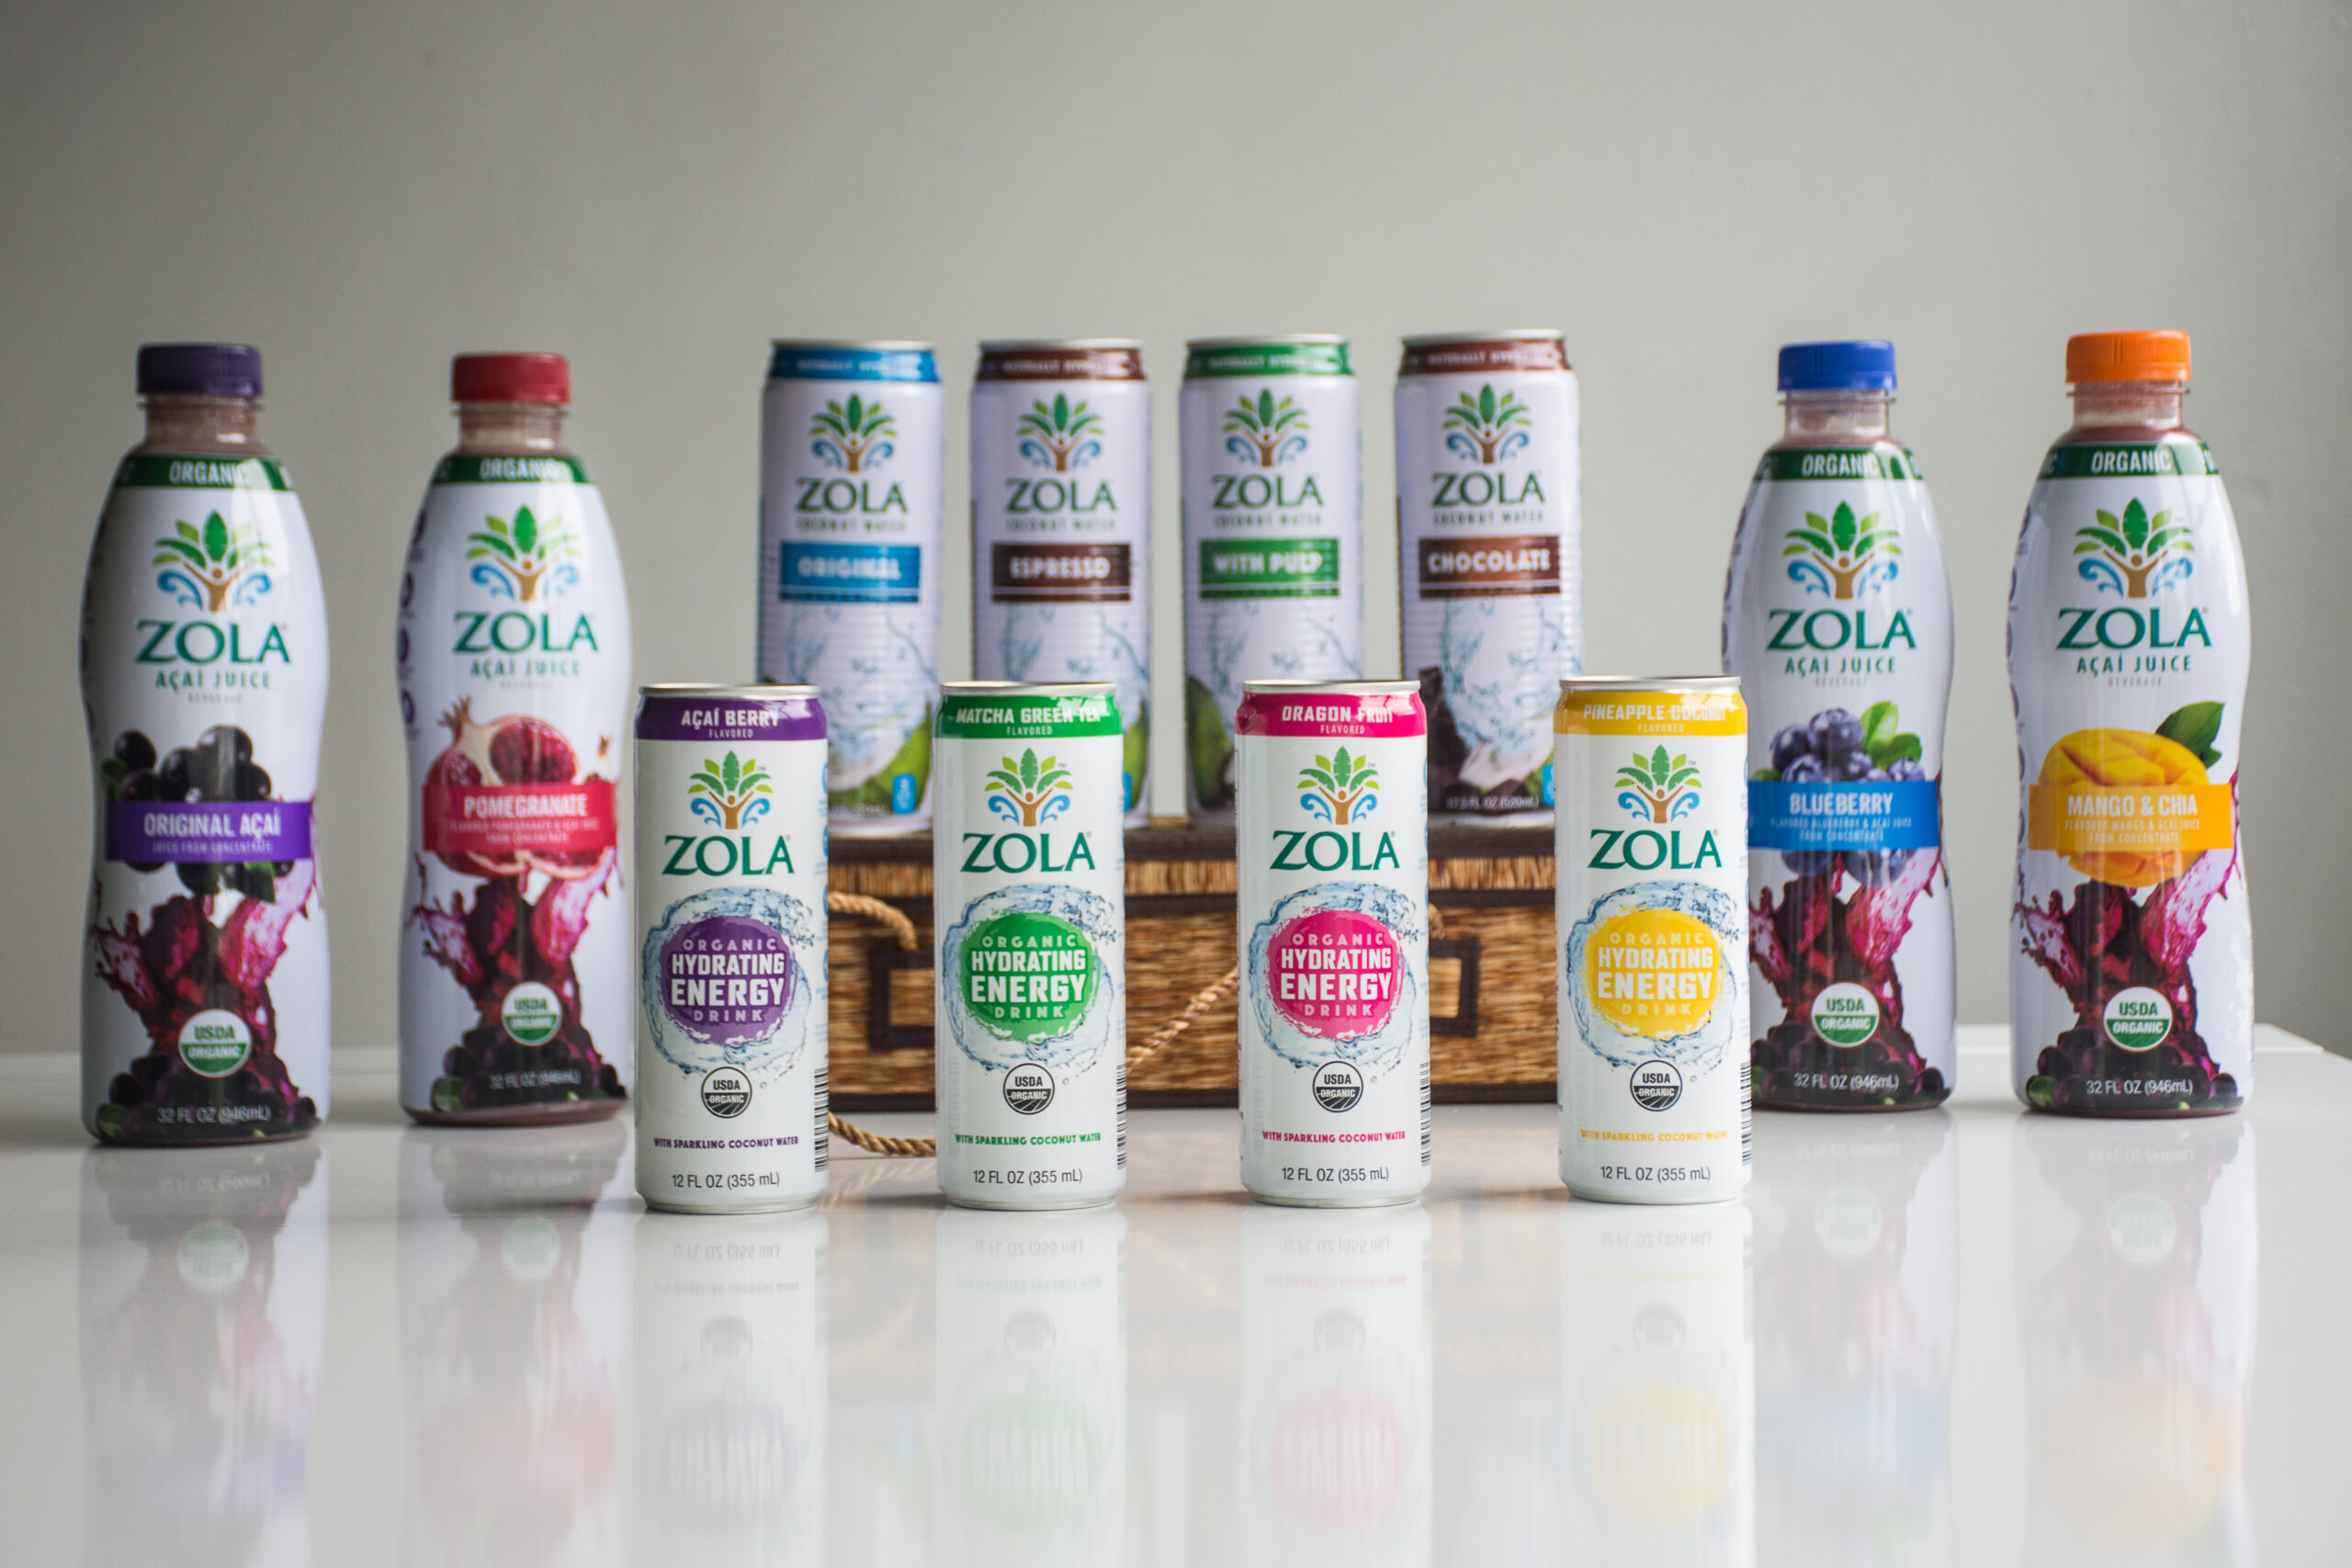 Q&A: Zola launches plant-based energy drink with modern lifestyles in mind